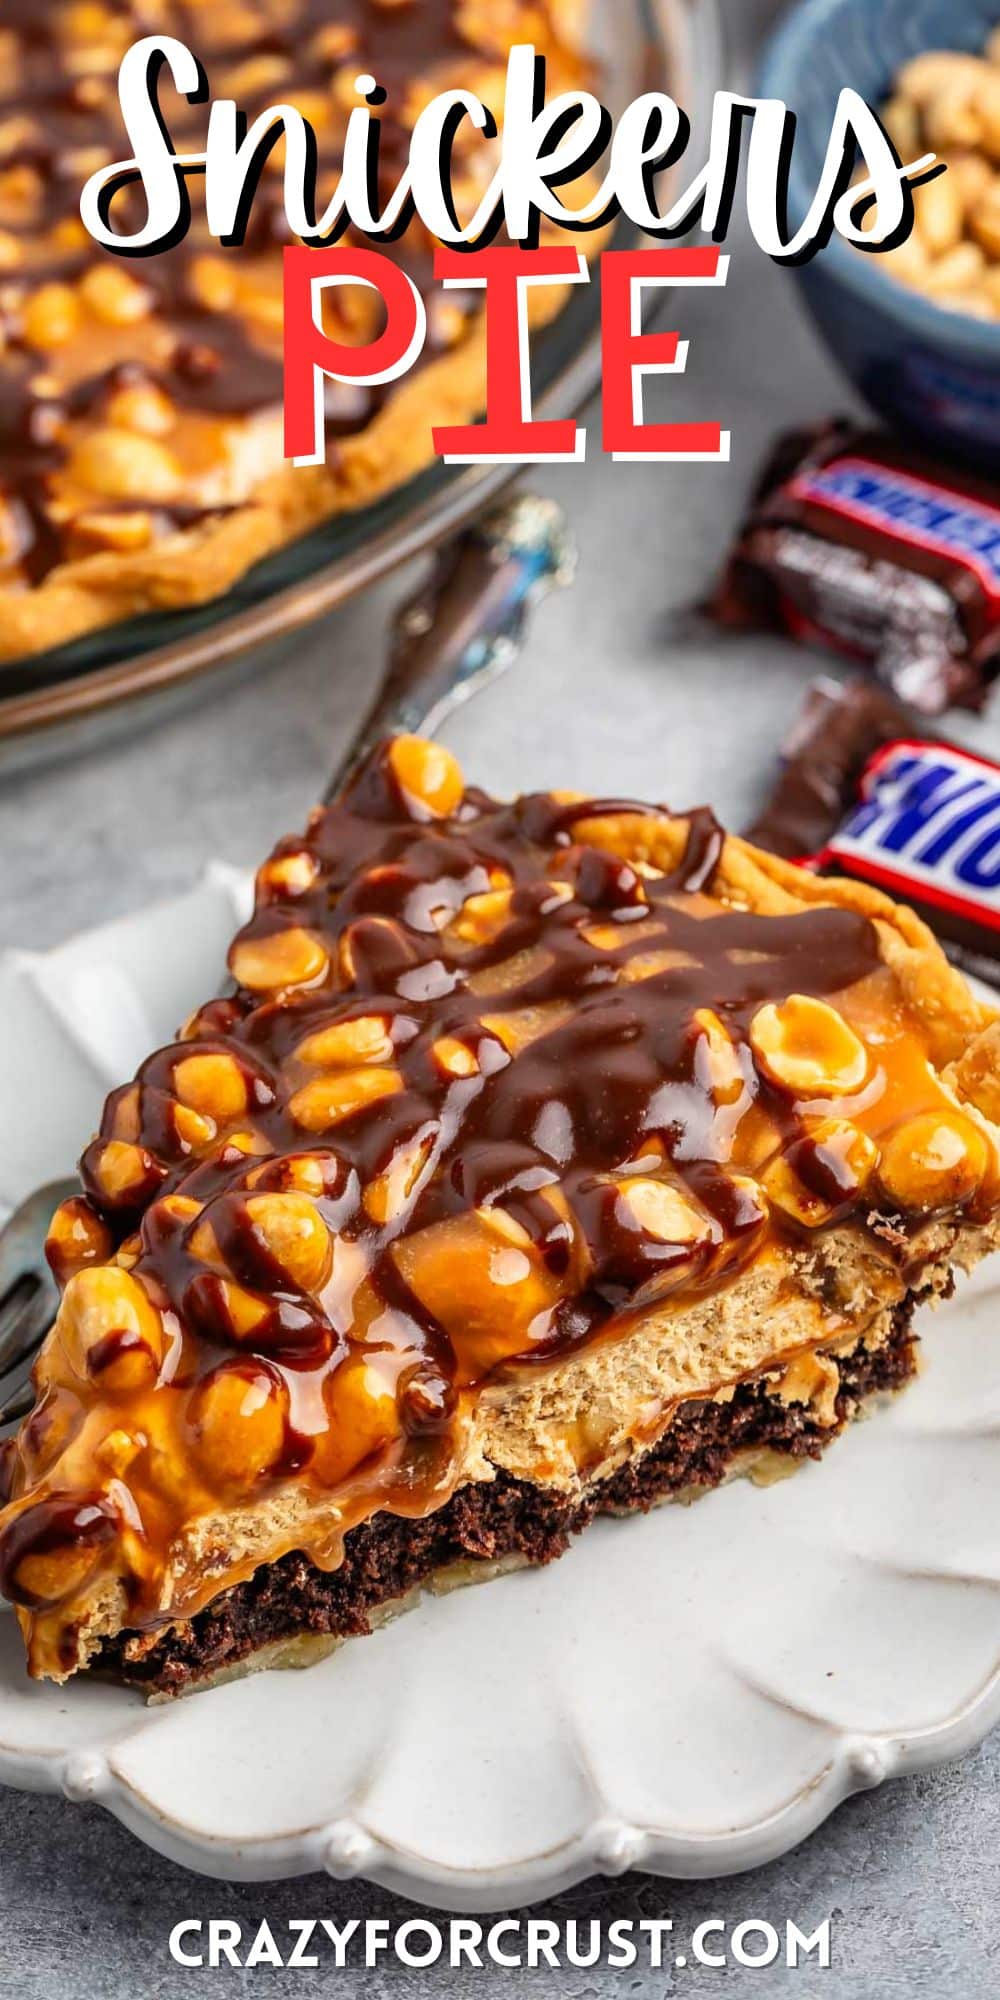 sliced snickers pie with nuts and chocolate sauce on top with words on the image.